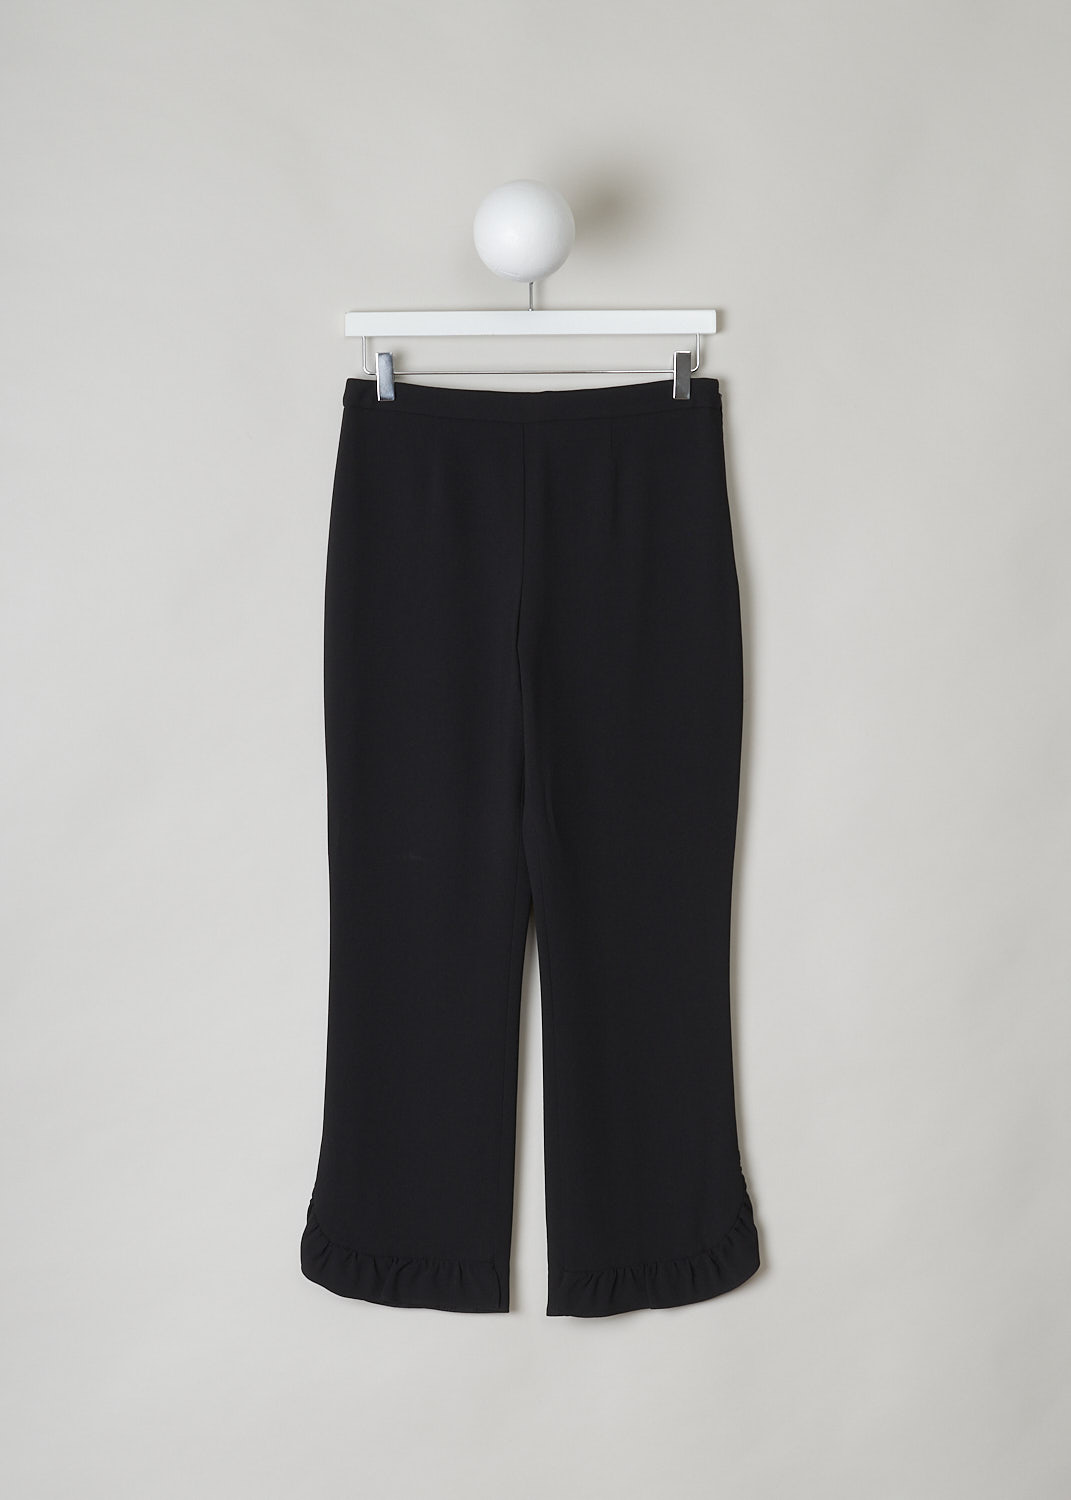 PRADA, BLACK PANTS WITH FRILLS, P206C_92U_F0002_SABLE, Black, Front, These black crepe pants have a narrow waistband and a concealed side zip that functions as the closure option. The straight pant legs have a hemline with frills in the front.
